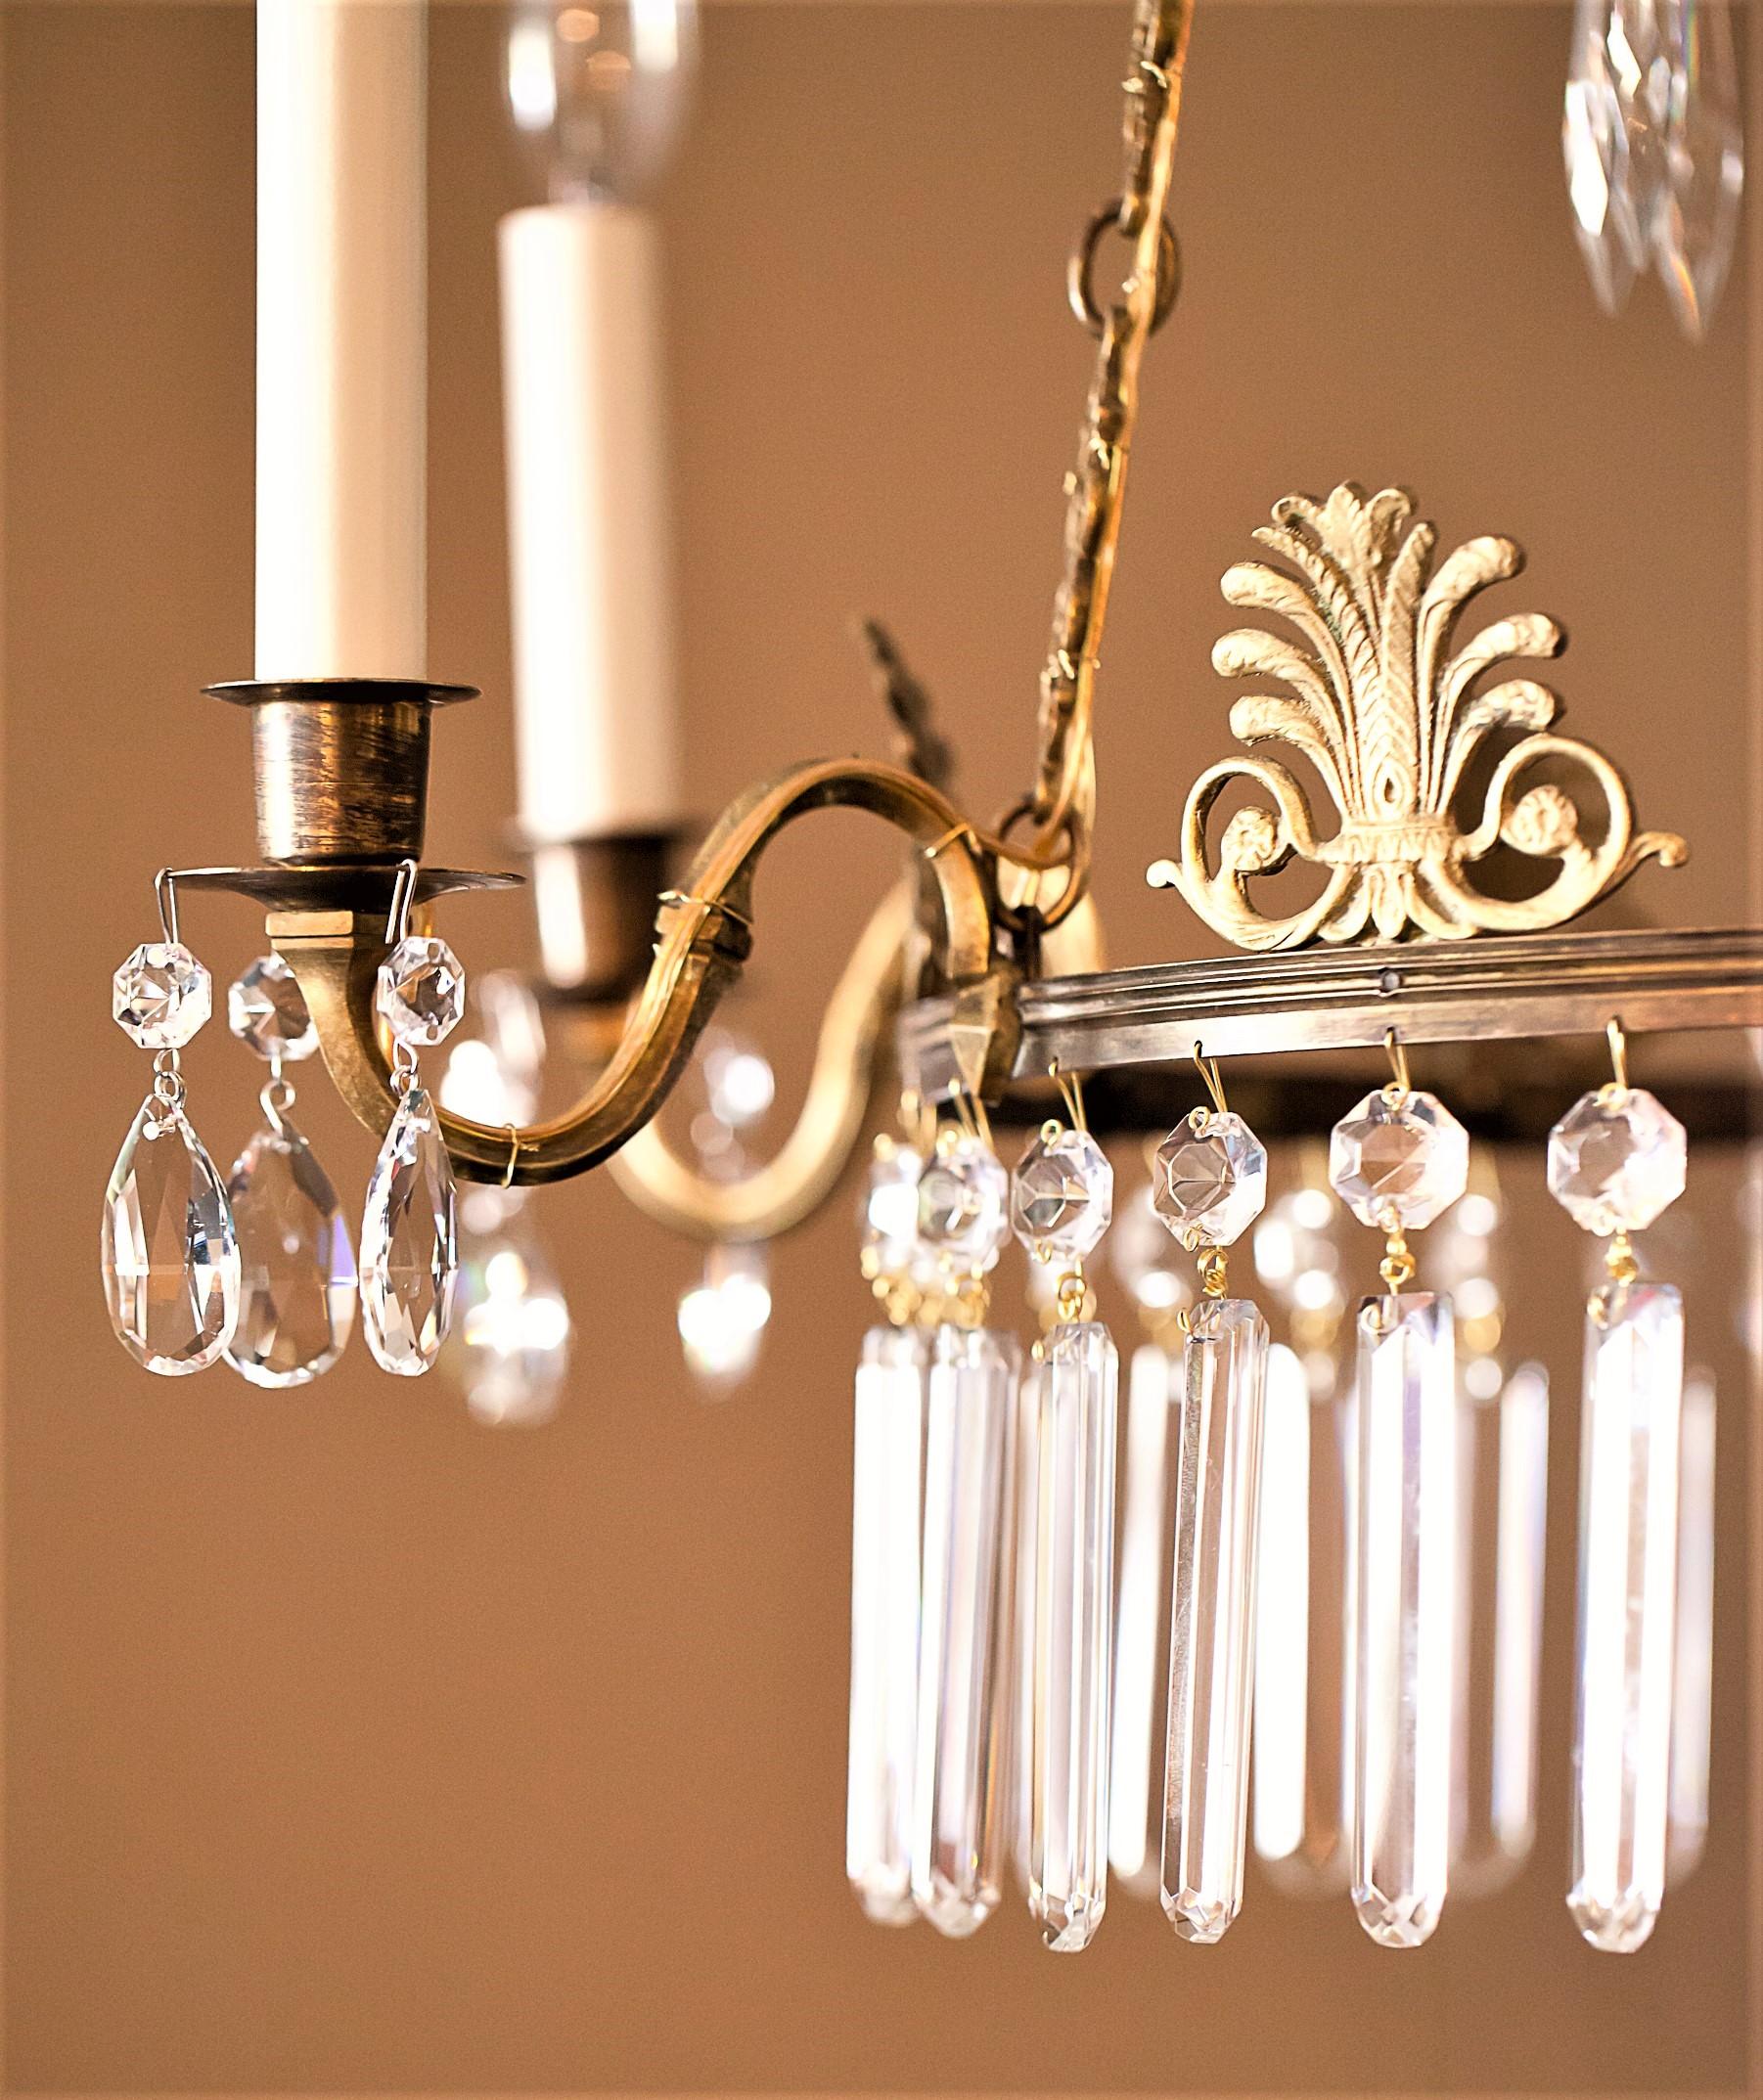 6-Light Neoclassical Style Brass and Crystal Chandelier, Sweden, circa 1890 For Sale 4